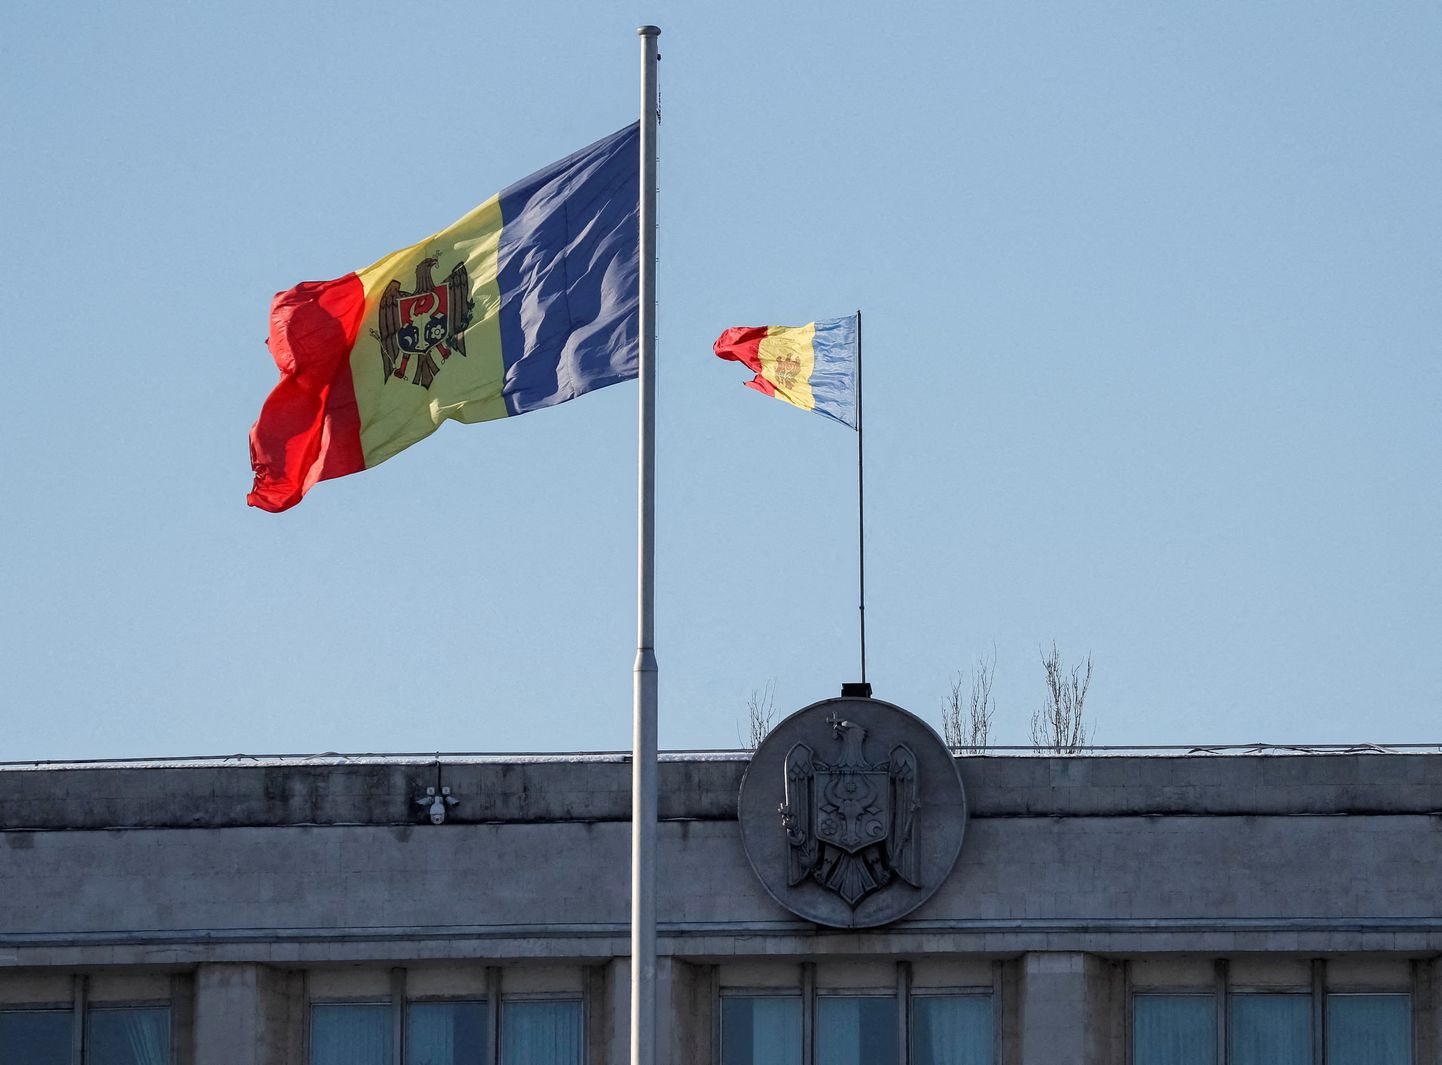 Two Moldovan national flags  in central Chisinau, Moldova.